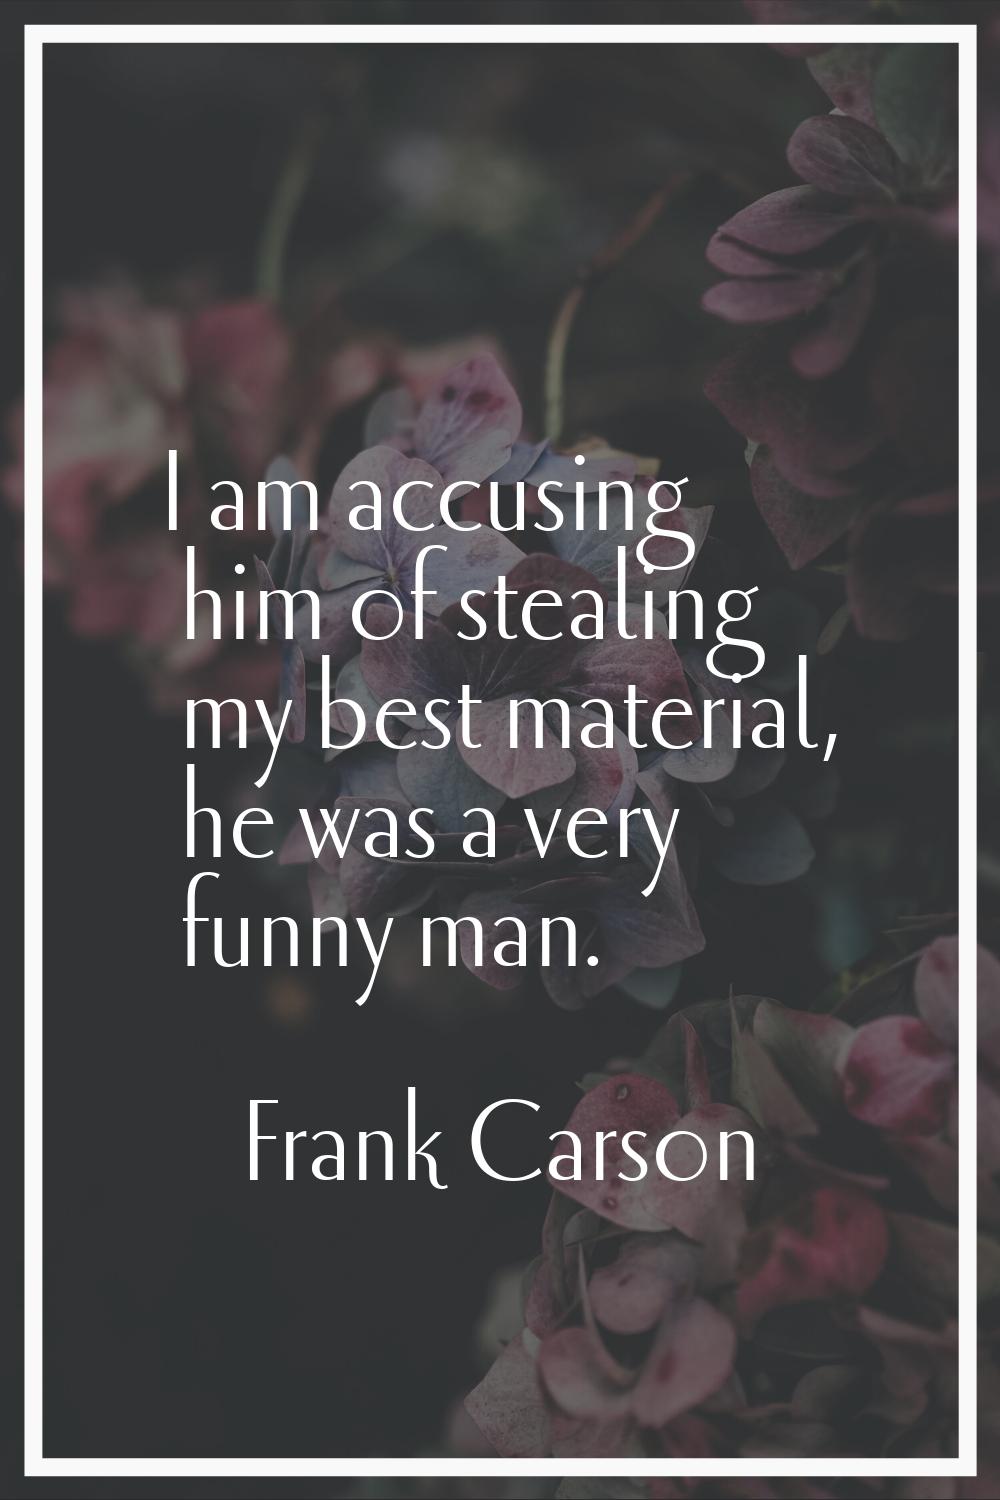 I am accusing him of stealing my best material, he was a very funny man.